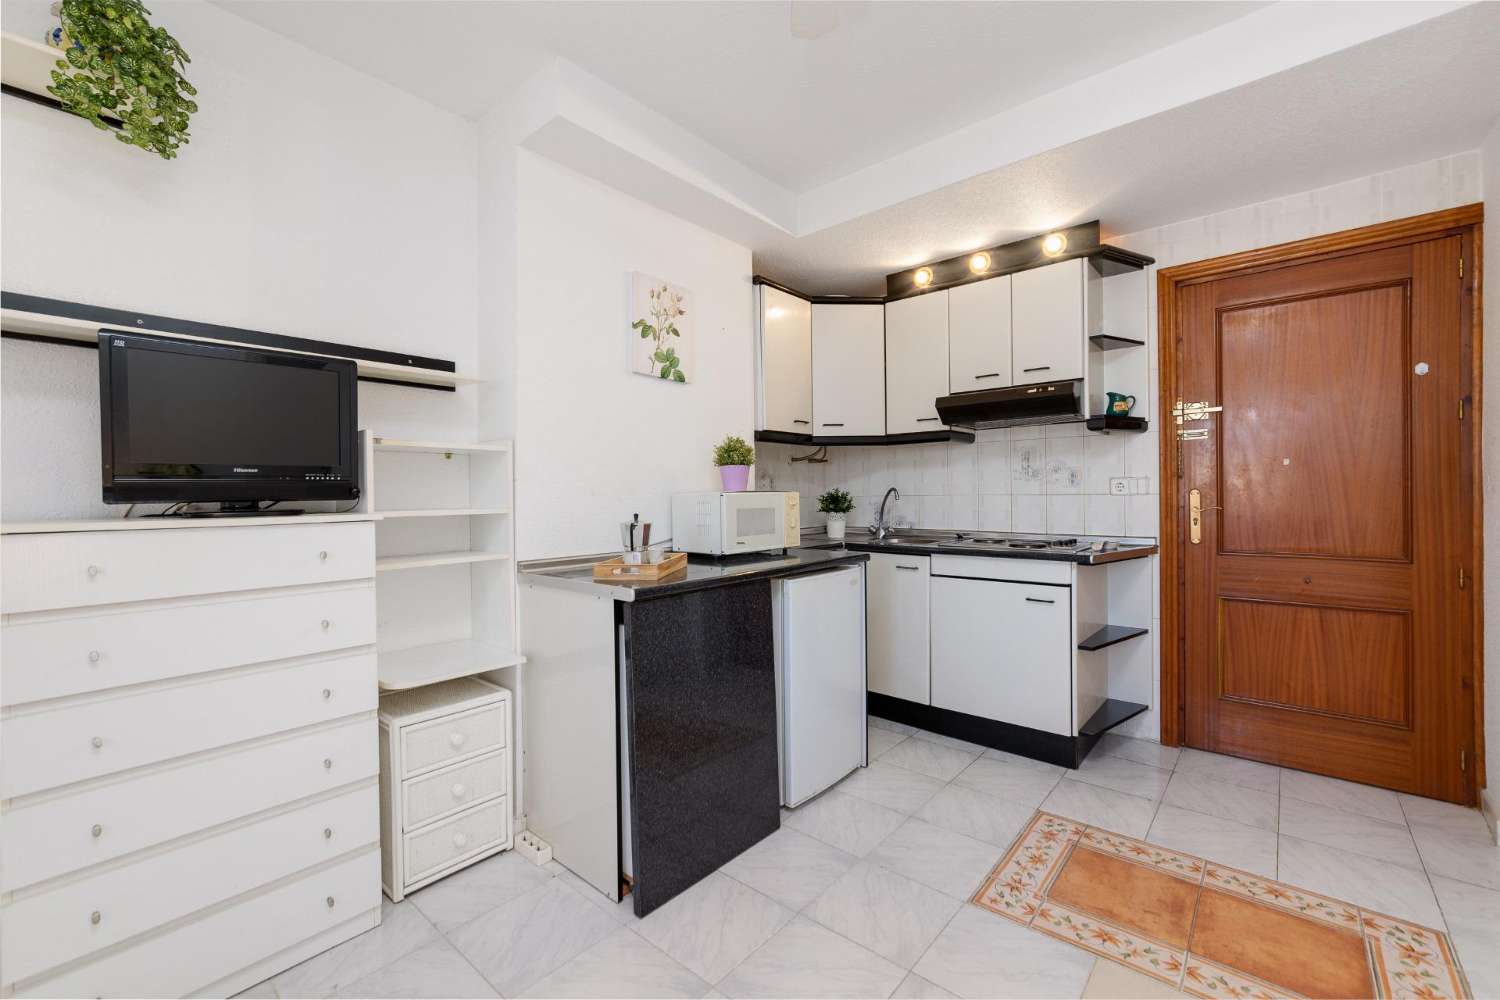 CENTRALLY LOCATED 1 BEDROOM APARTMENT